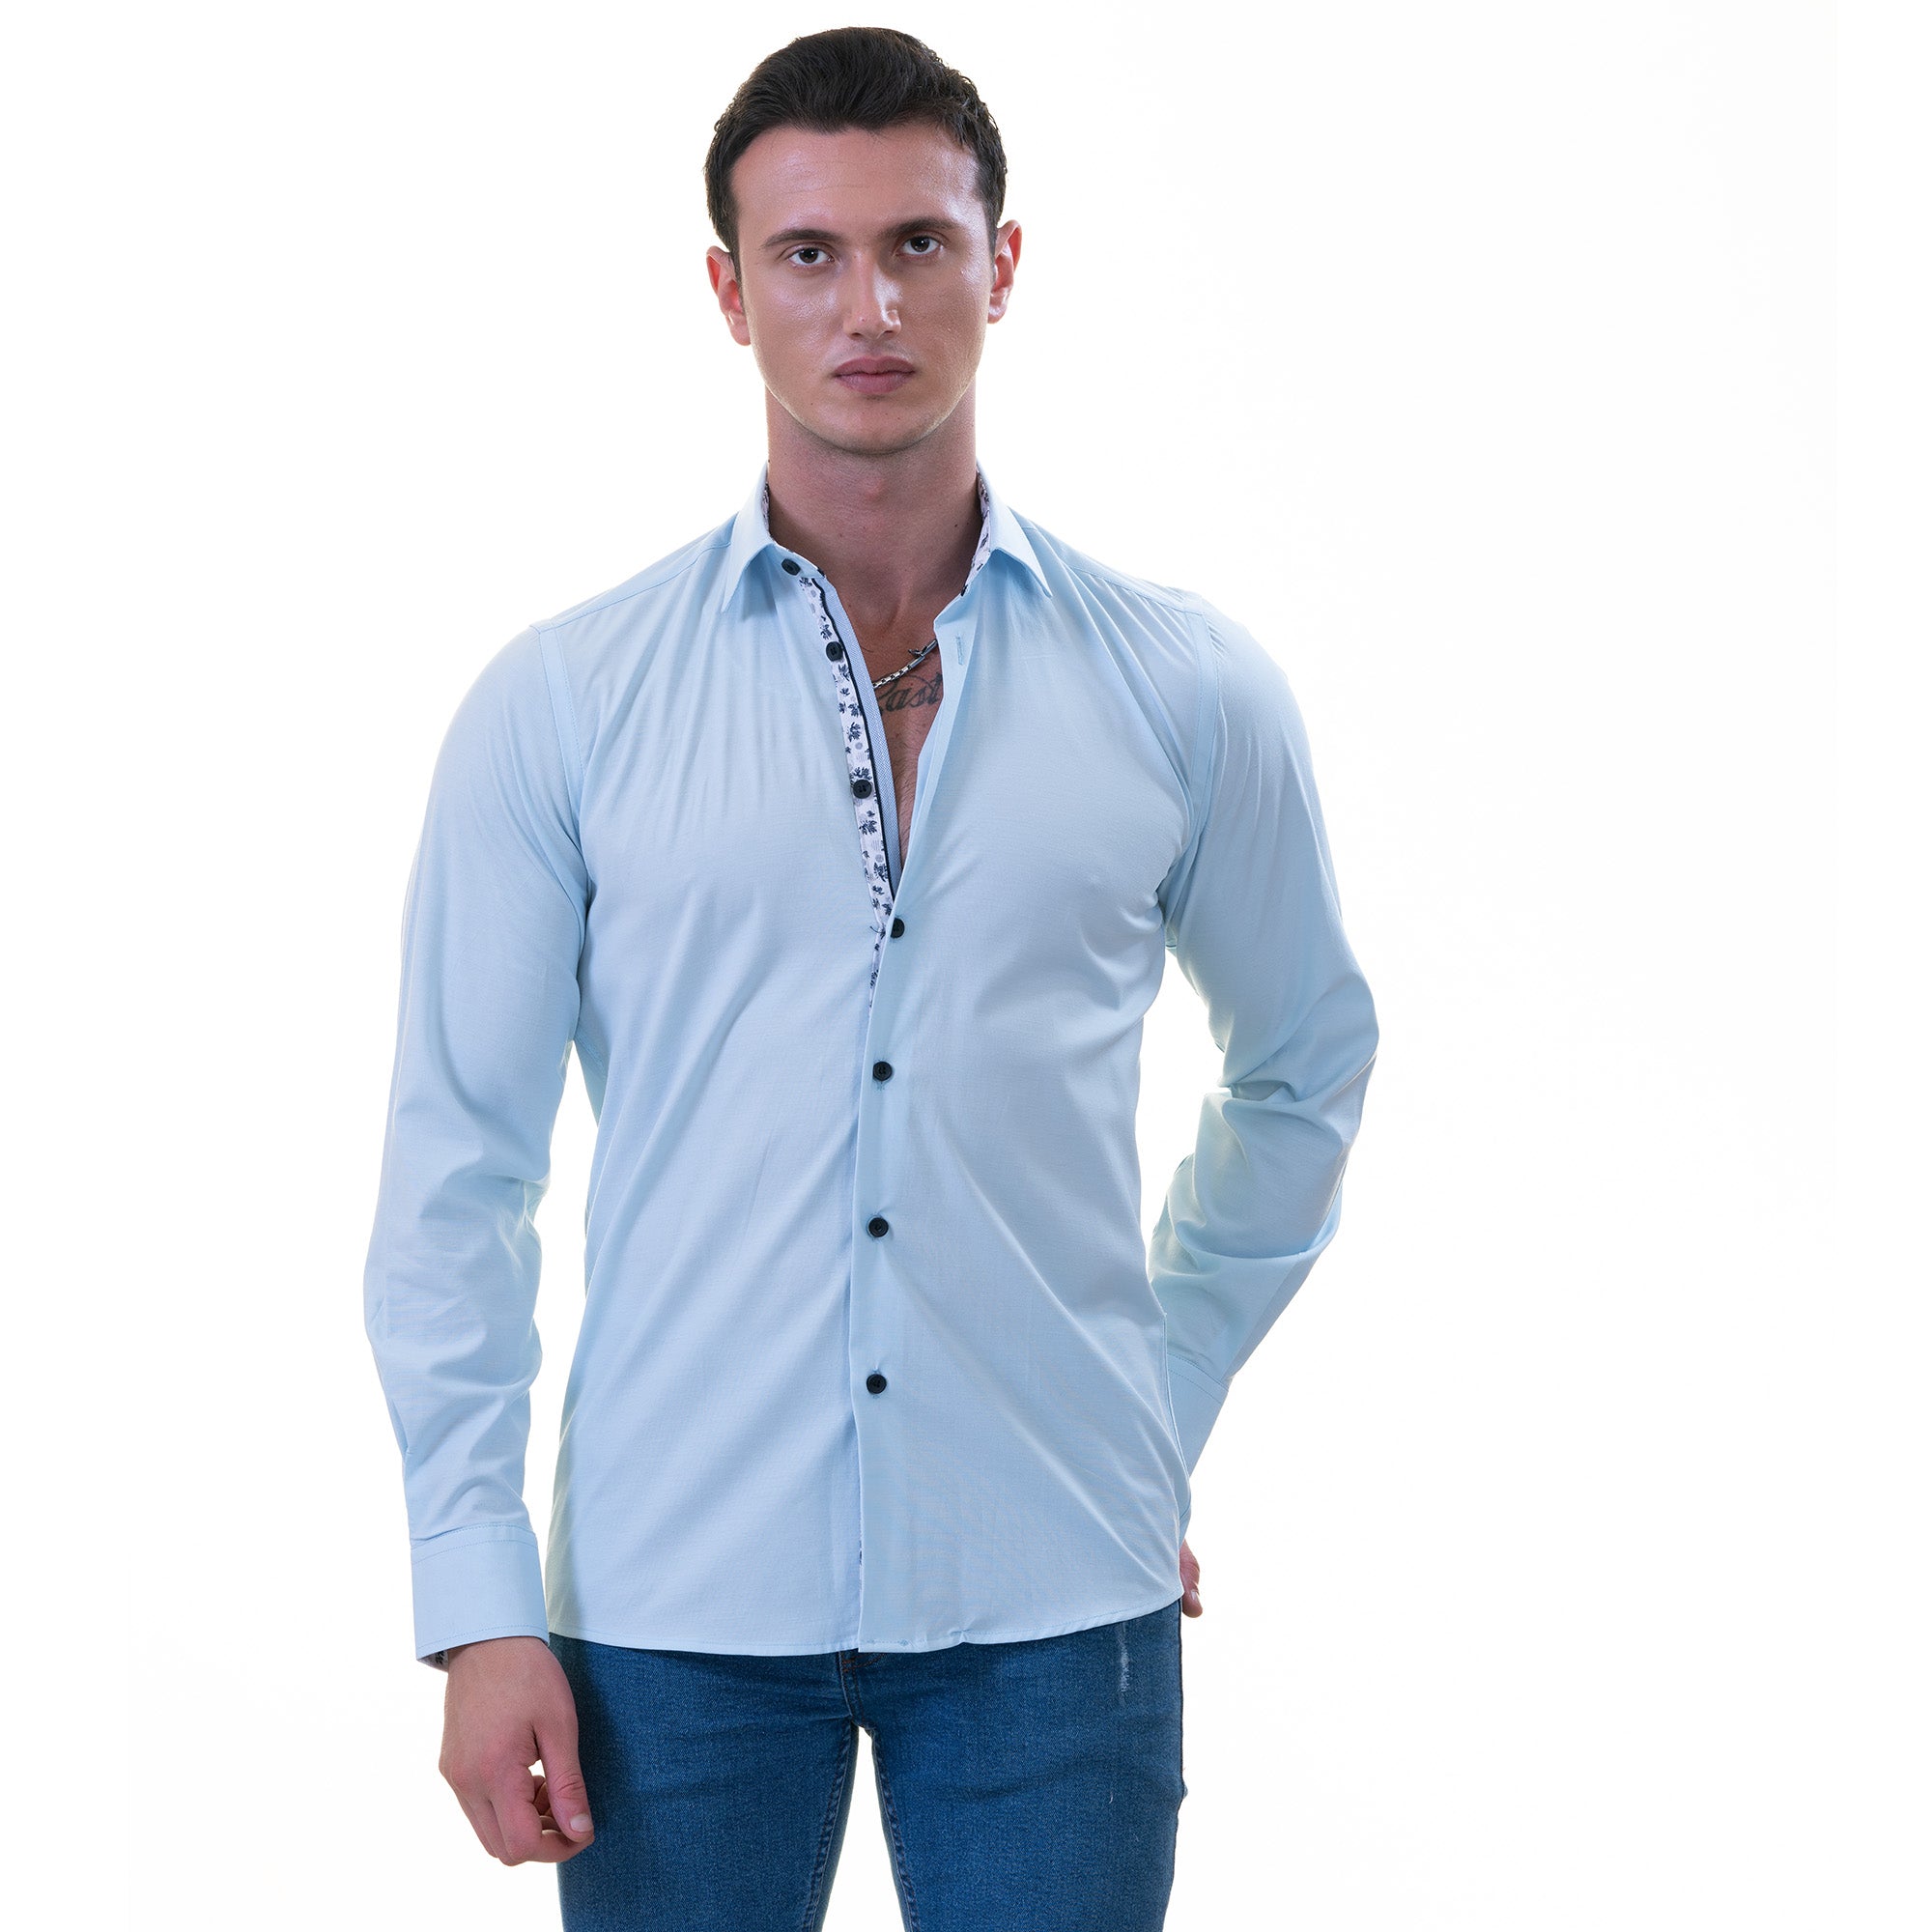 Blue inside Printed Men's Slim Fit Designer French Cuff Shirt - Tailored Cotton Shirts for Work and Casual Wear